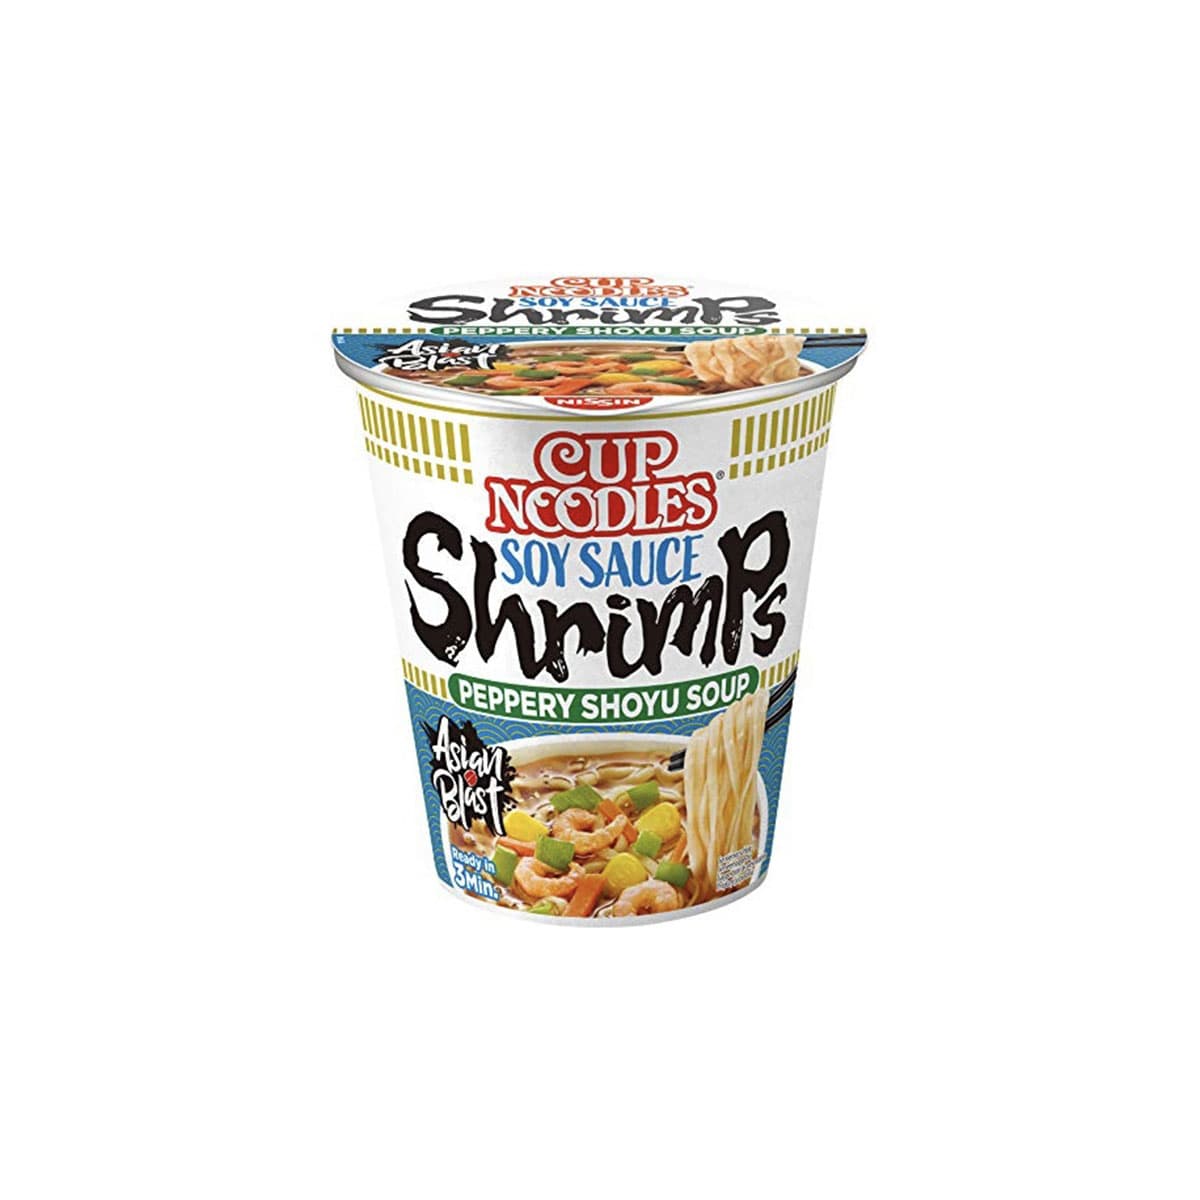 Cup noodles istantanei ai gamberetti – Kathay